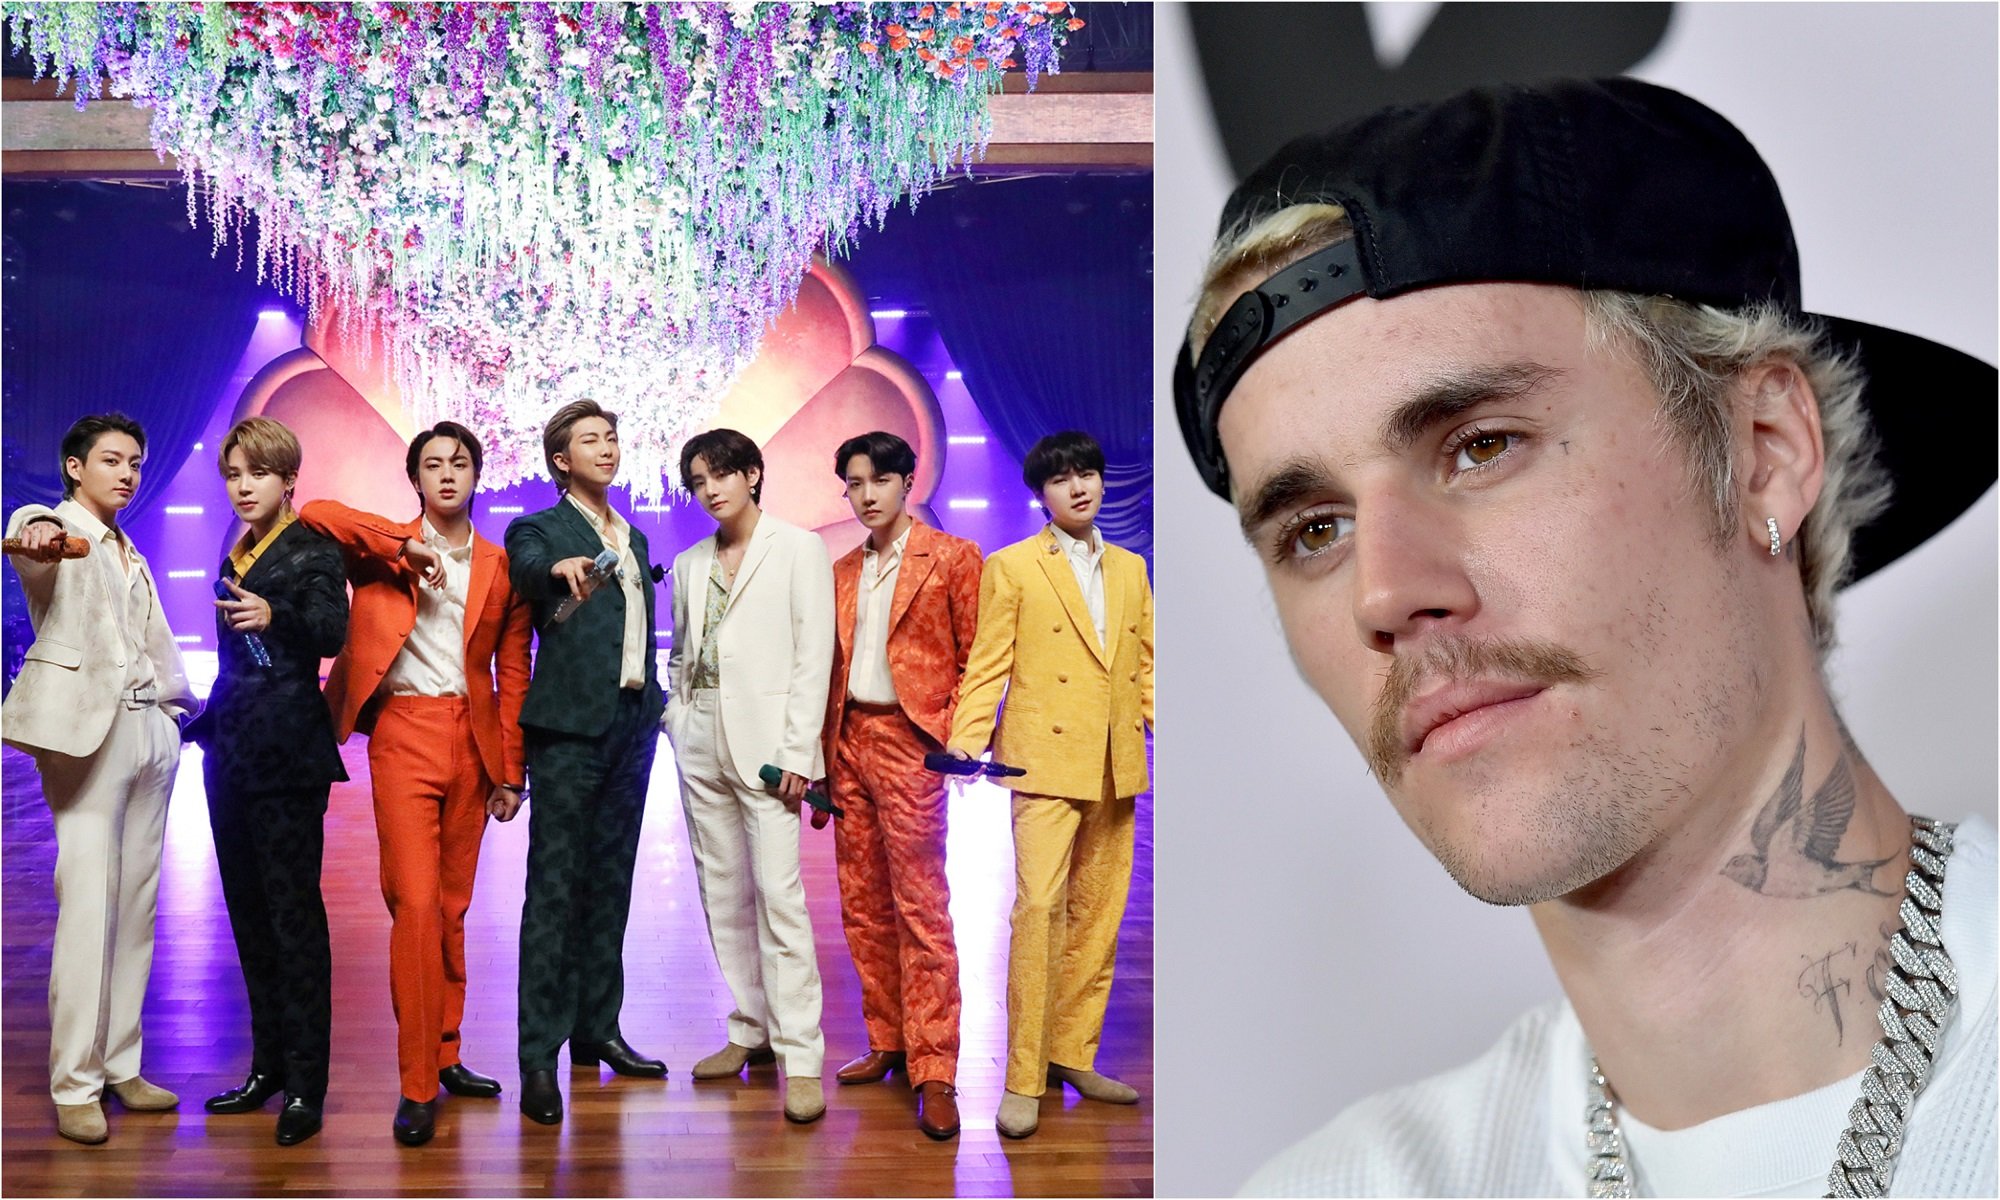 A joined photo of BTS at the 2021 Grammy Awards and Justin Bieber the Premiere of YouTube Original's 'Justin Bieber: Seasons'